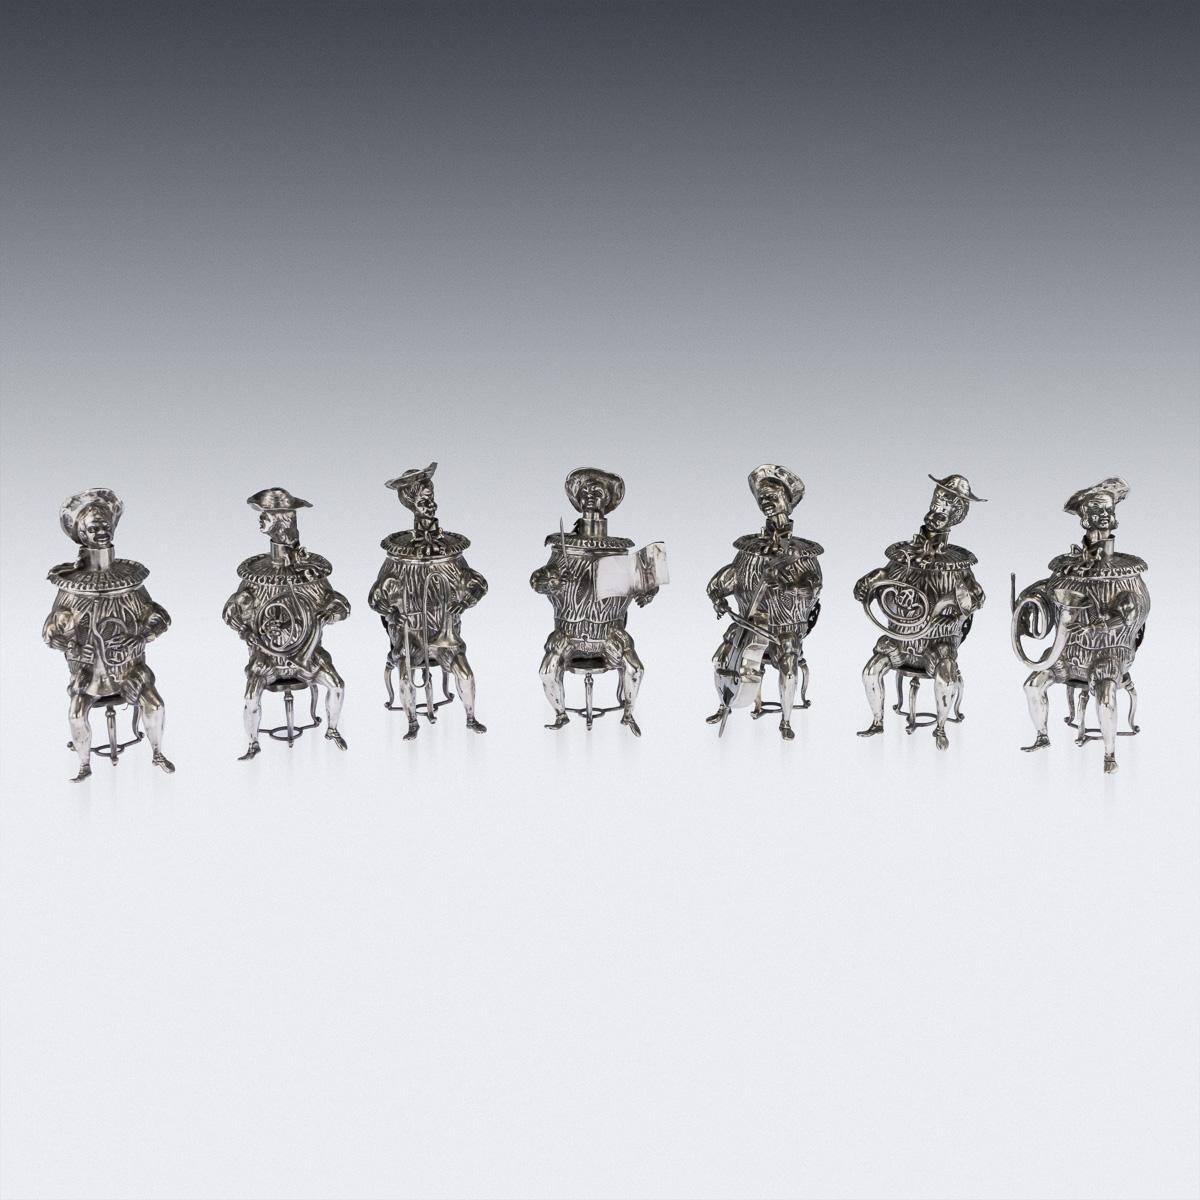 Antique early-20th century German exceptionally rare set of seven solid silver novelty cups modelled as a band of musicians seated on chairs, each with a cast round body and sprung head, plumed hat and ruffled collar, removable tops.

Hallmarked